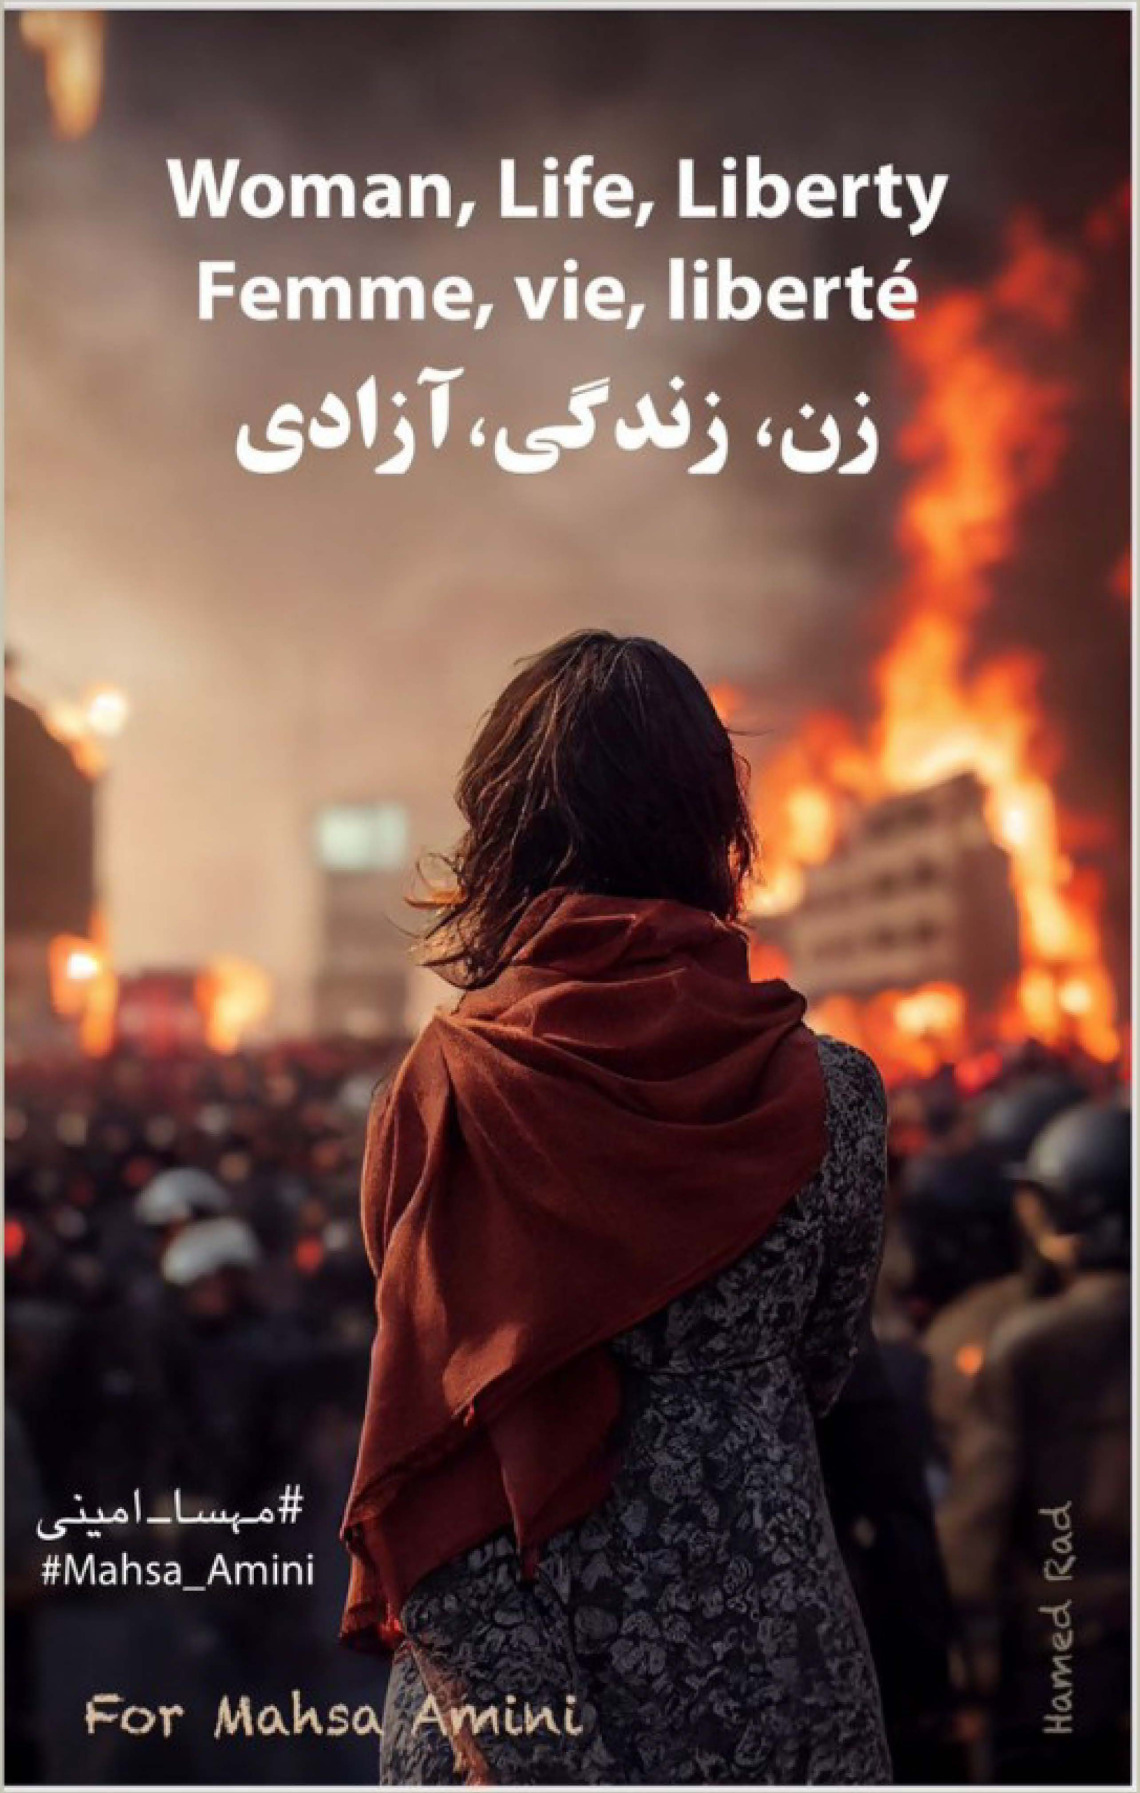 Event flyer for The Current Iranian Political Situation.